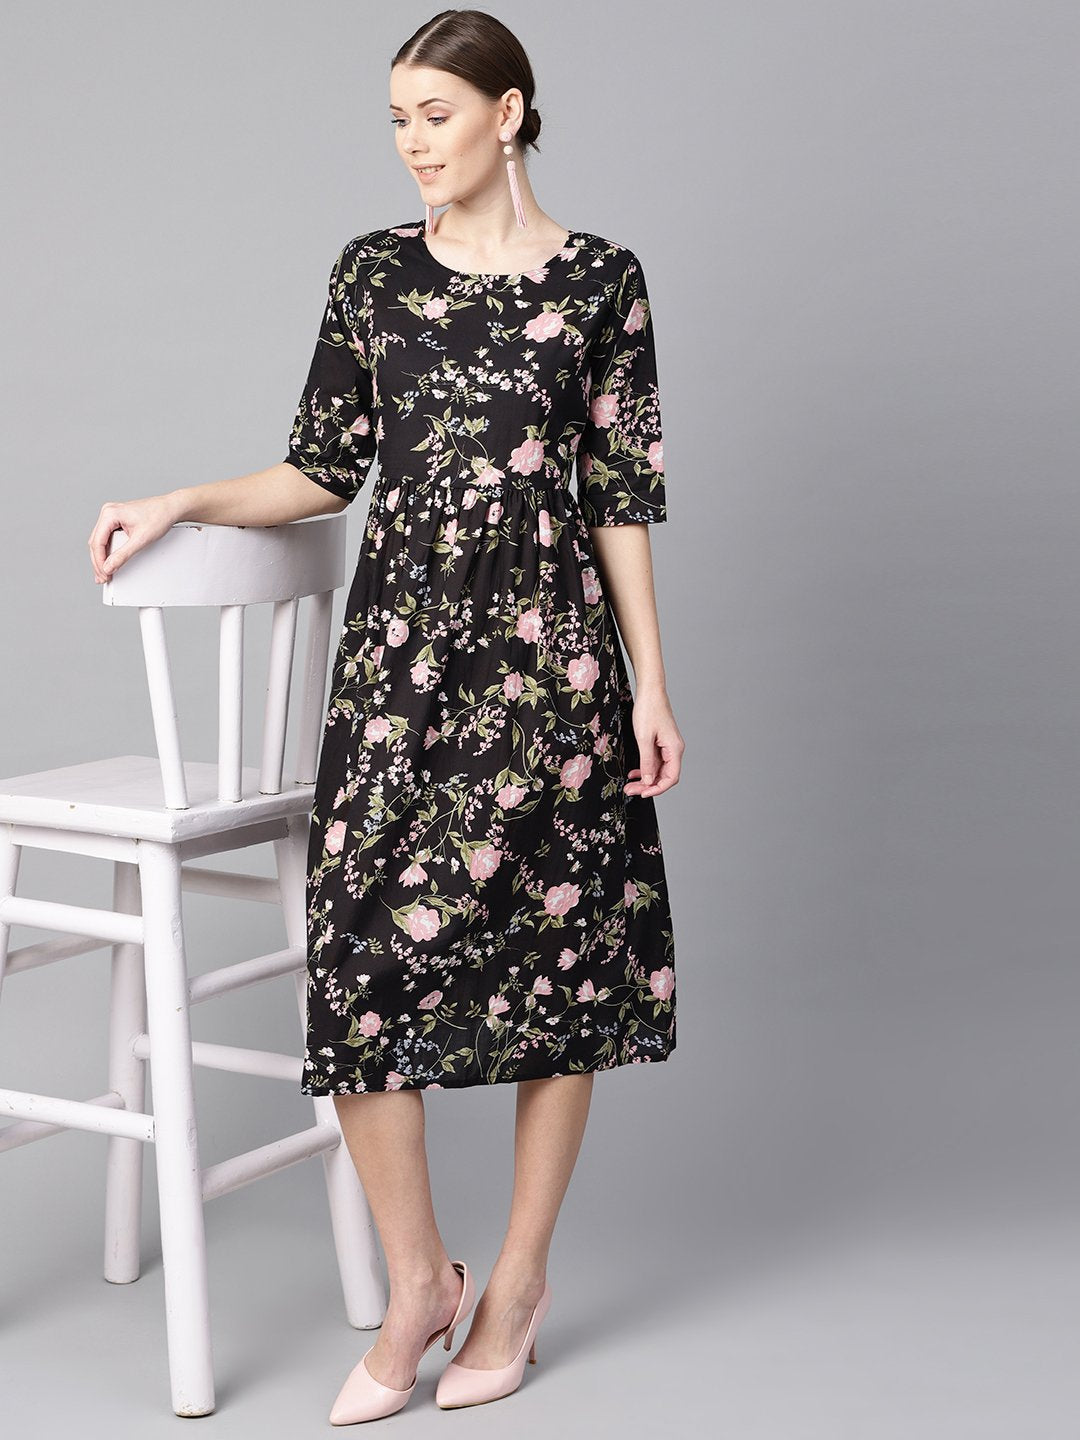 Women's Black Floral Dress With Round Neck & Half Sleeves - Nayo Clothing